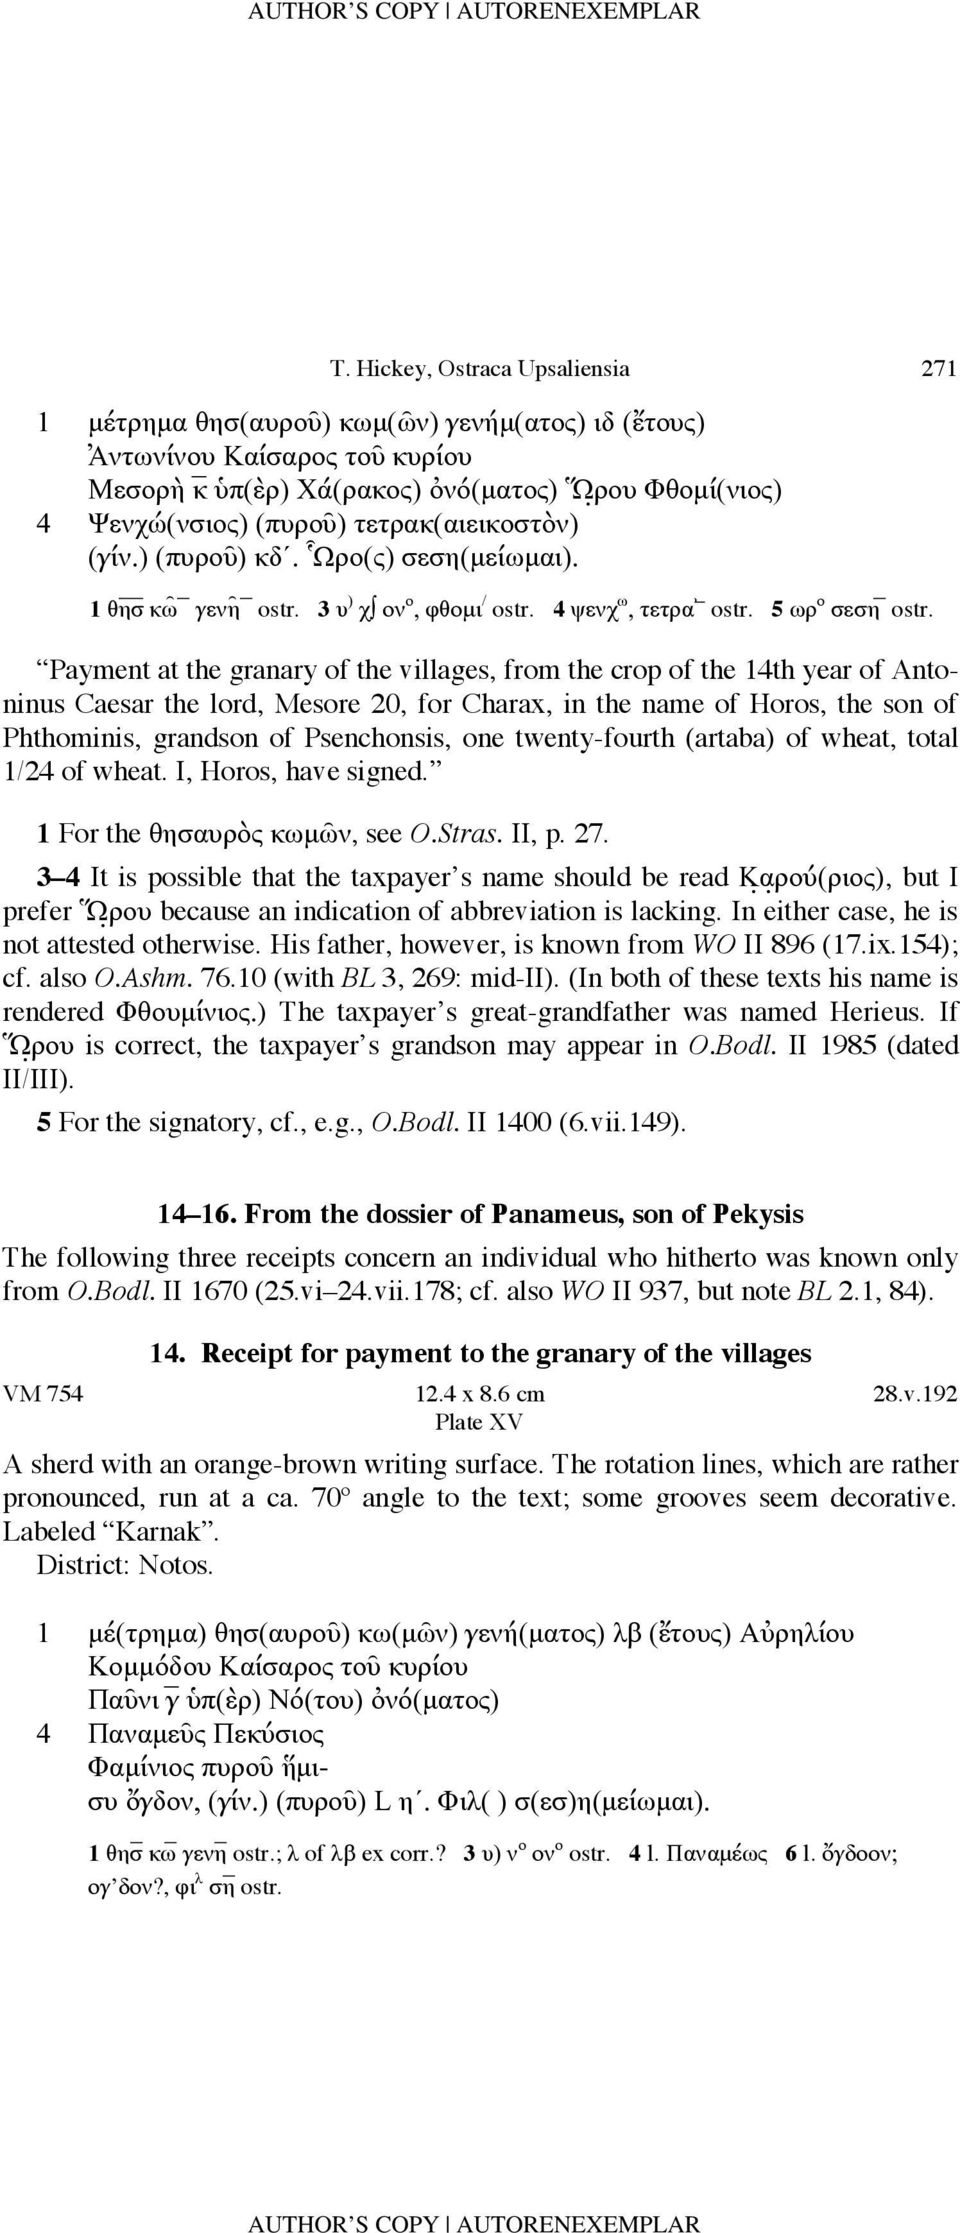 Payment at the granary of the villages, from the crop of the 14th year of Antoninus Caesar the lord, Mesore 20, for Charax, in the name of Horos, the son of Phthominis, grandson of Psenchonsis, one